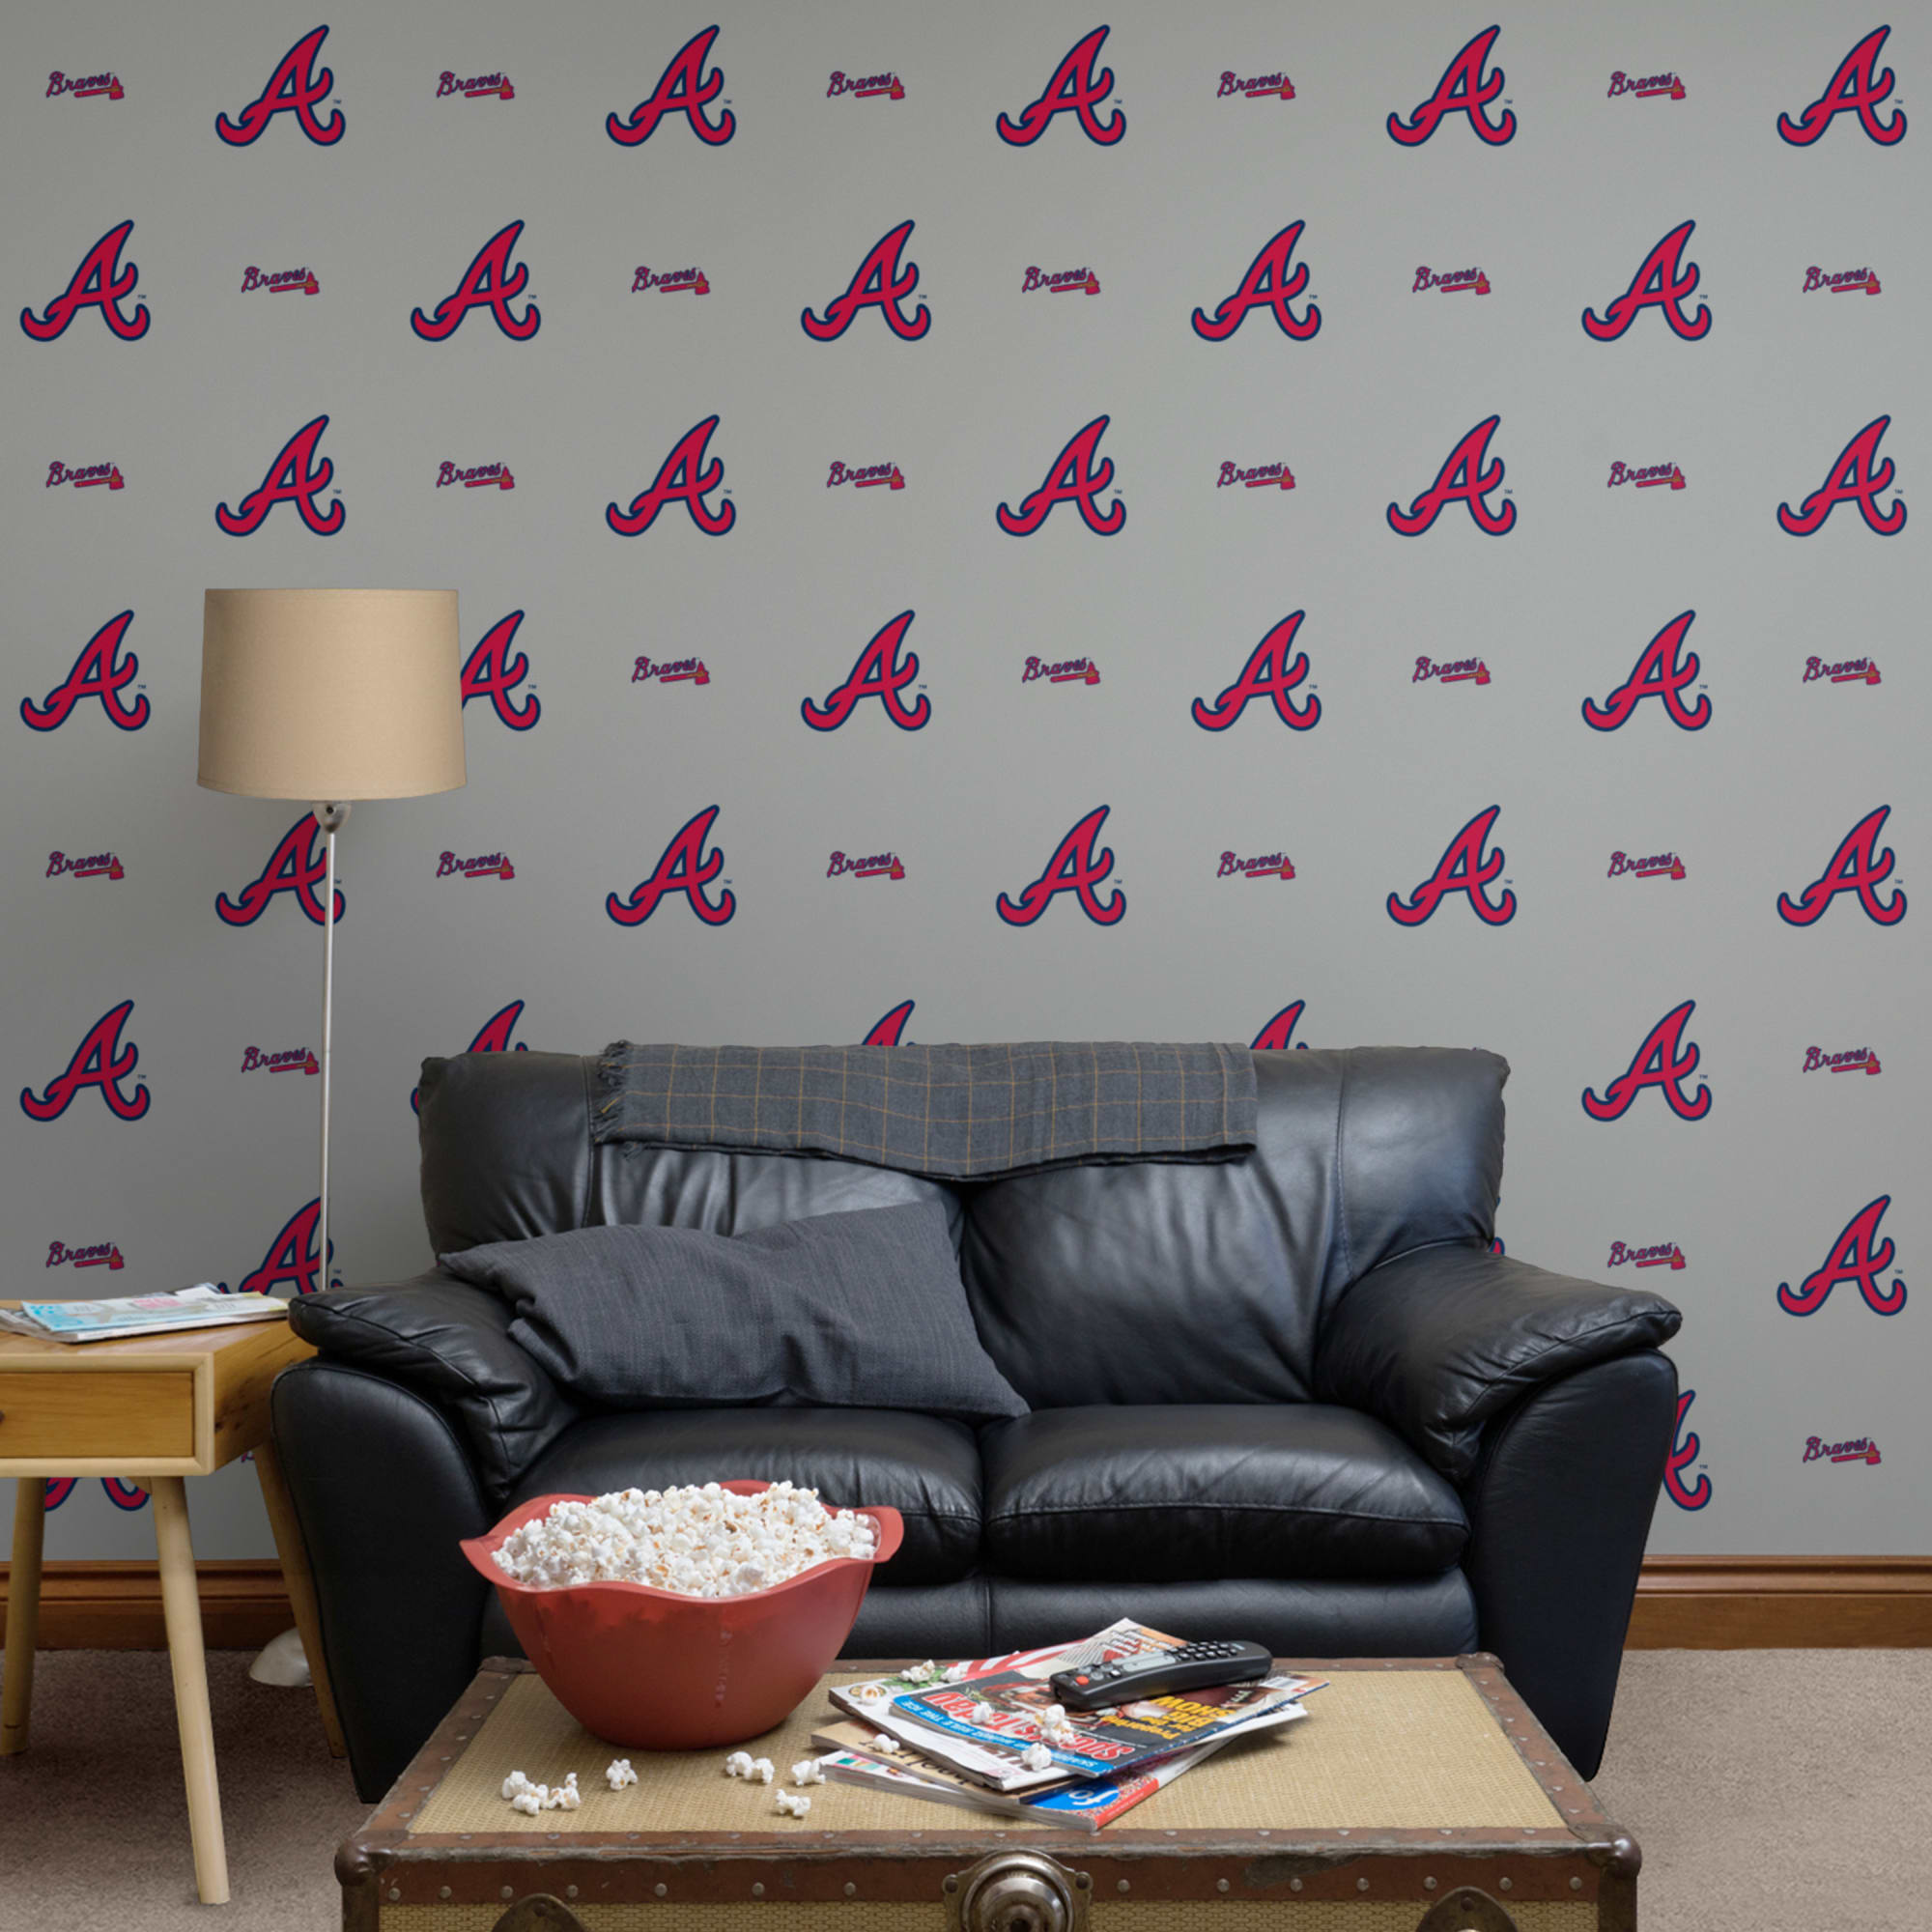 Atlanta Braves: Logo Pattern - Officially Licensed Removable Wallpaper 12" x 12" Sample by Fathead